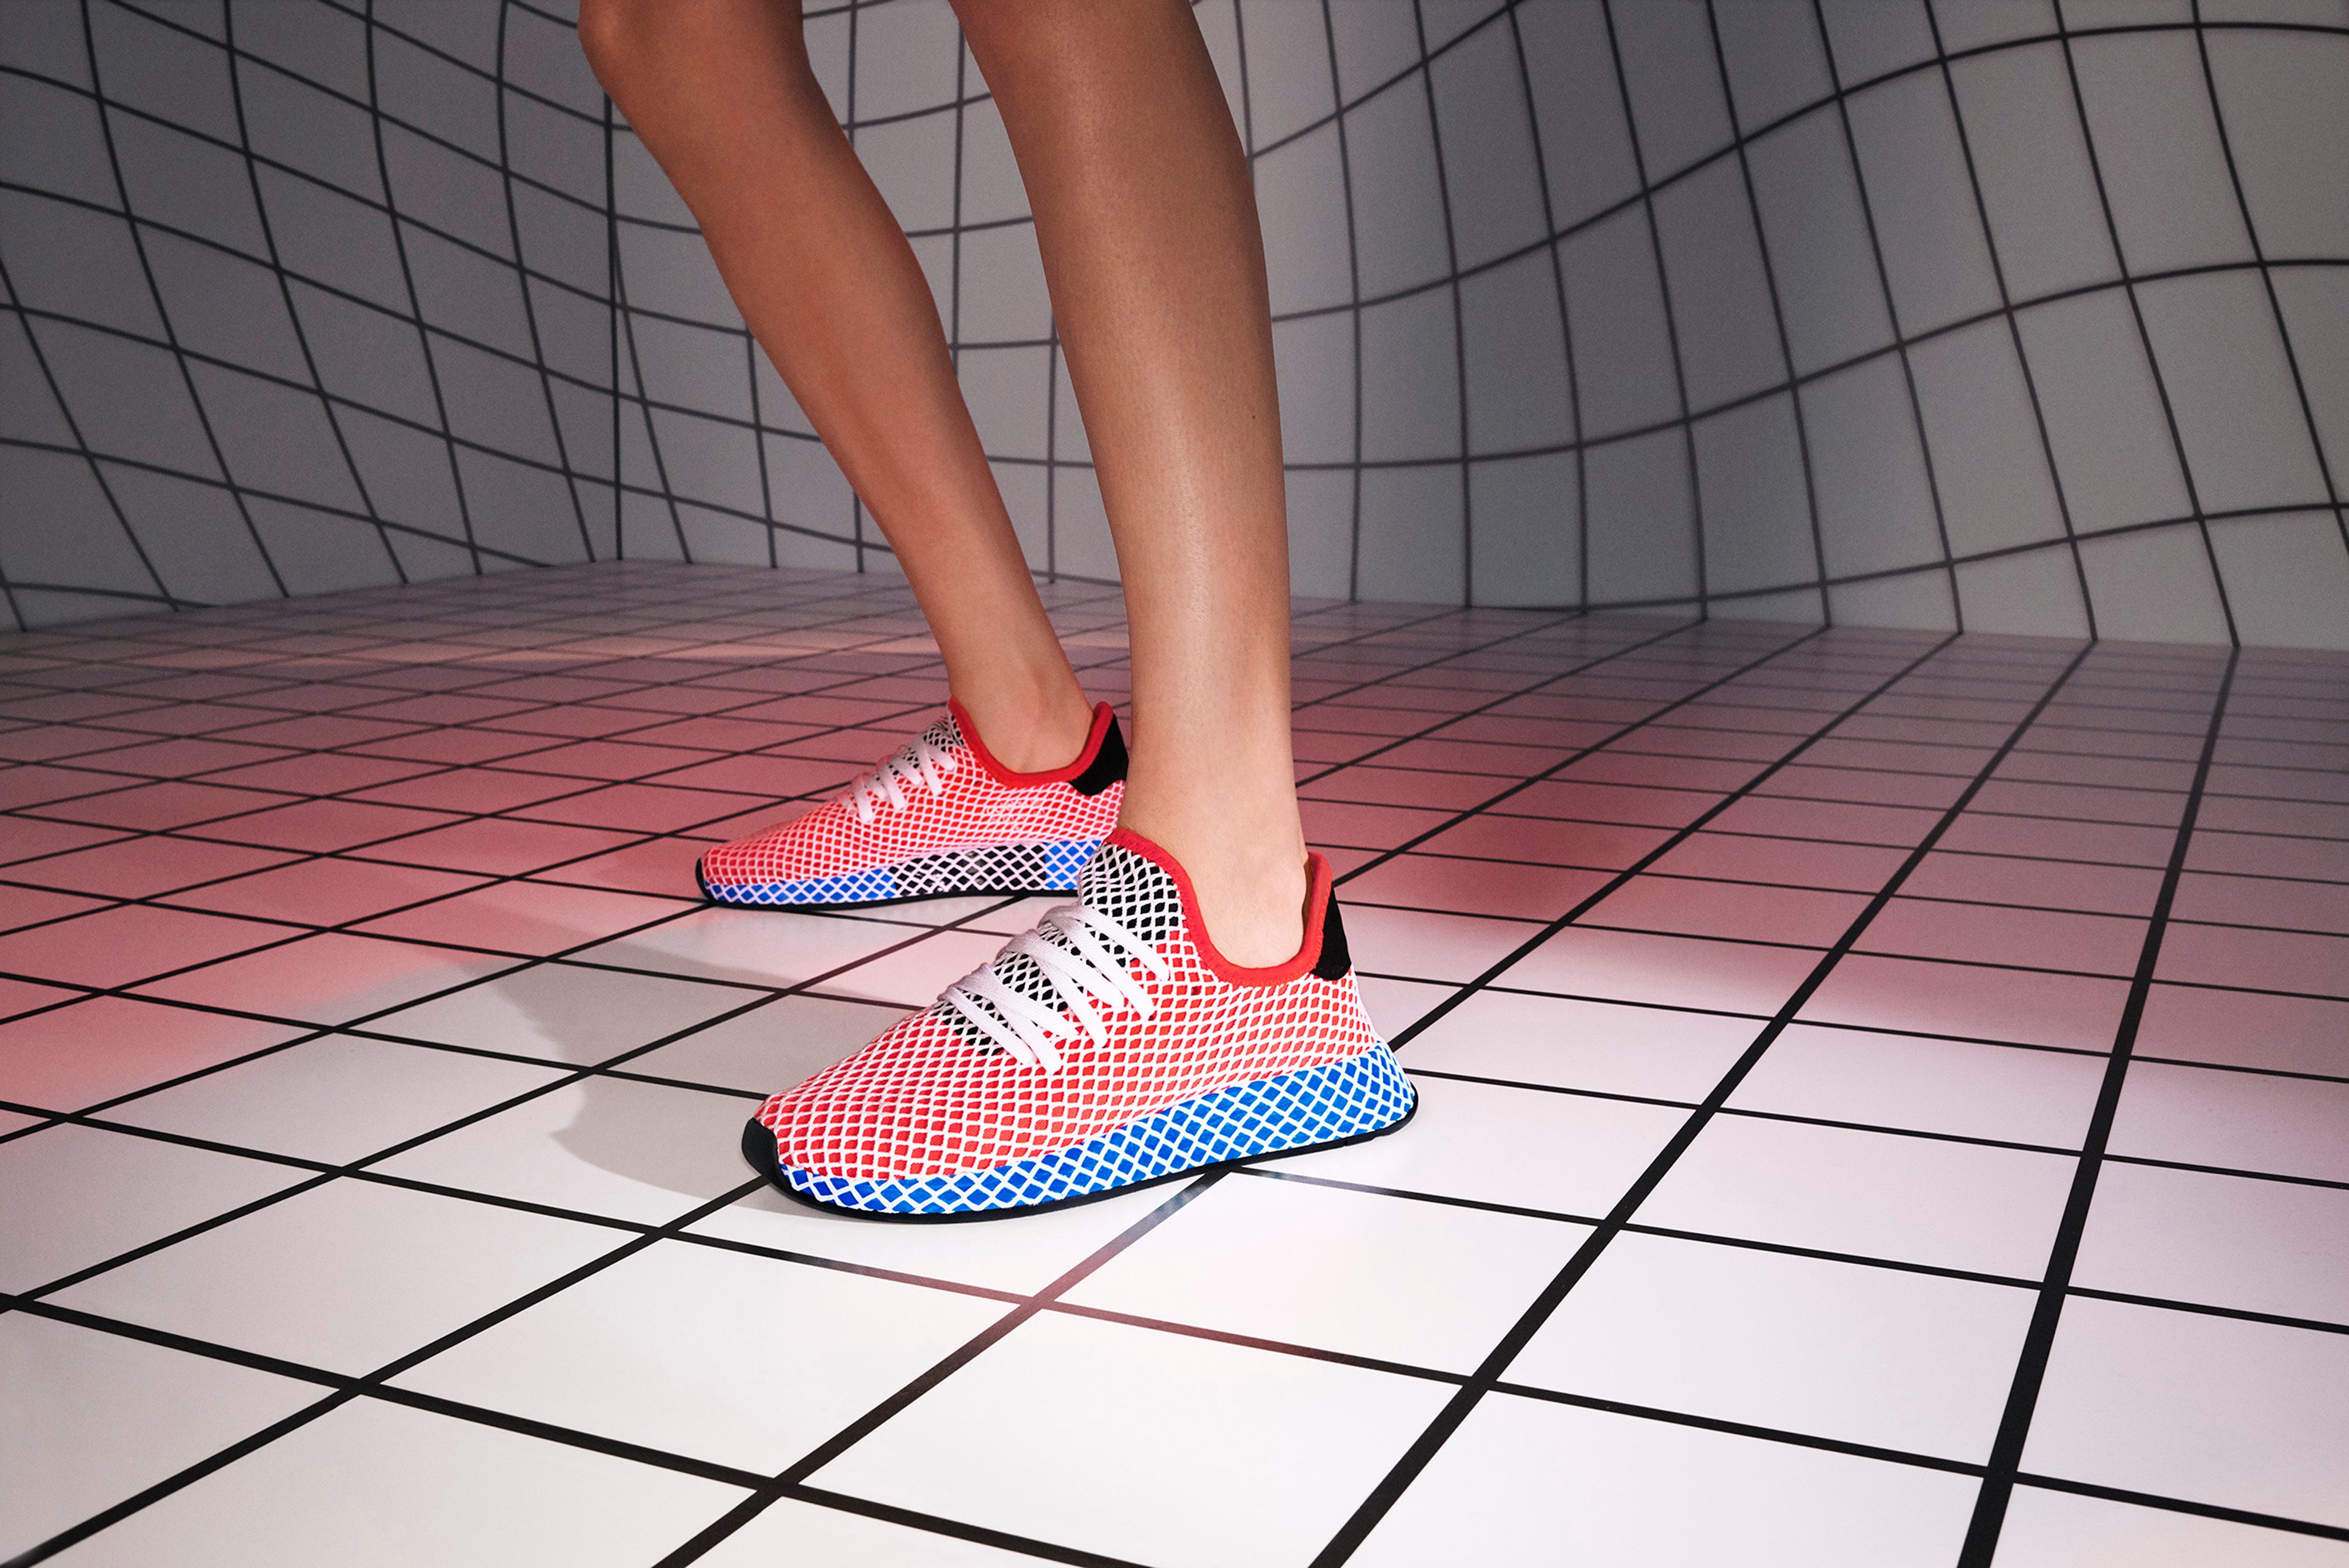 SS18_DEERUPT_QC2624_AC8466_DIRECTIONAL_ON_FOOT_13_012_RGB